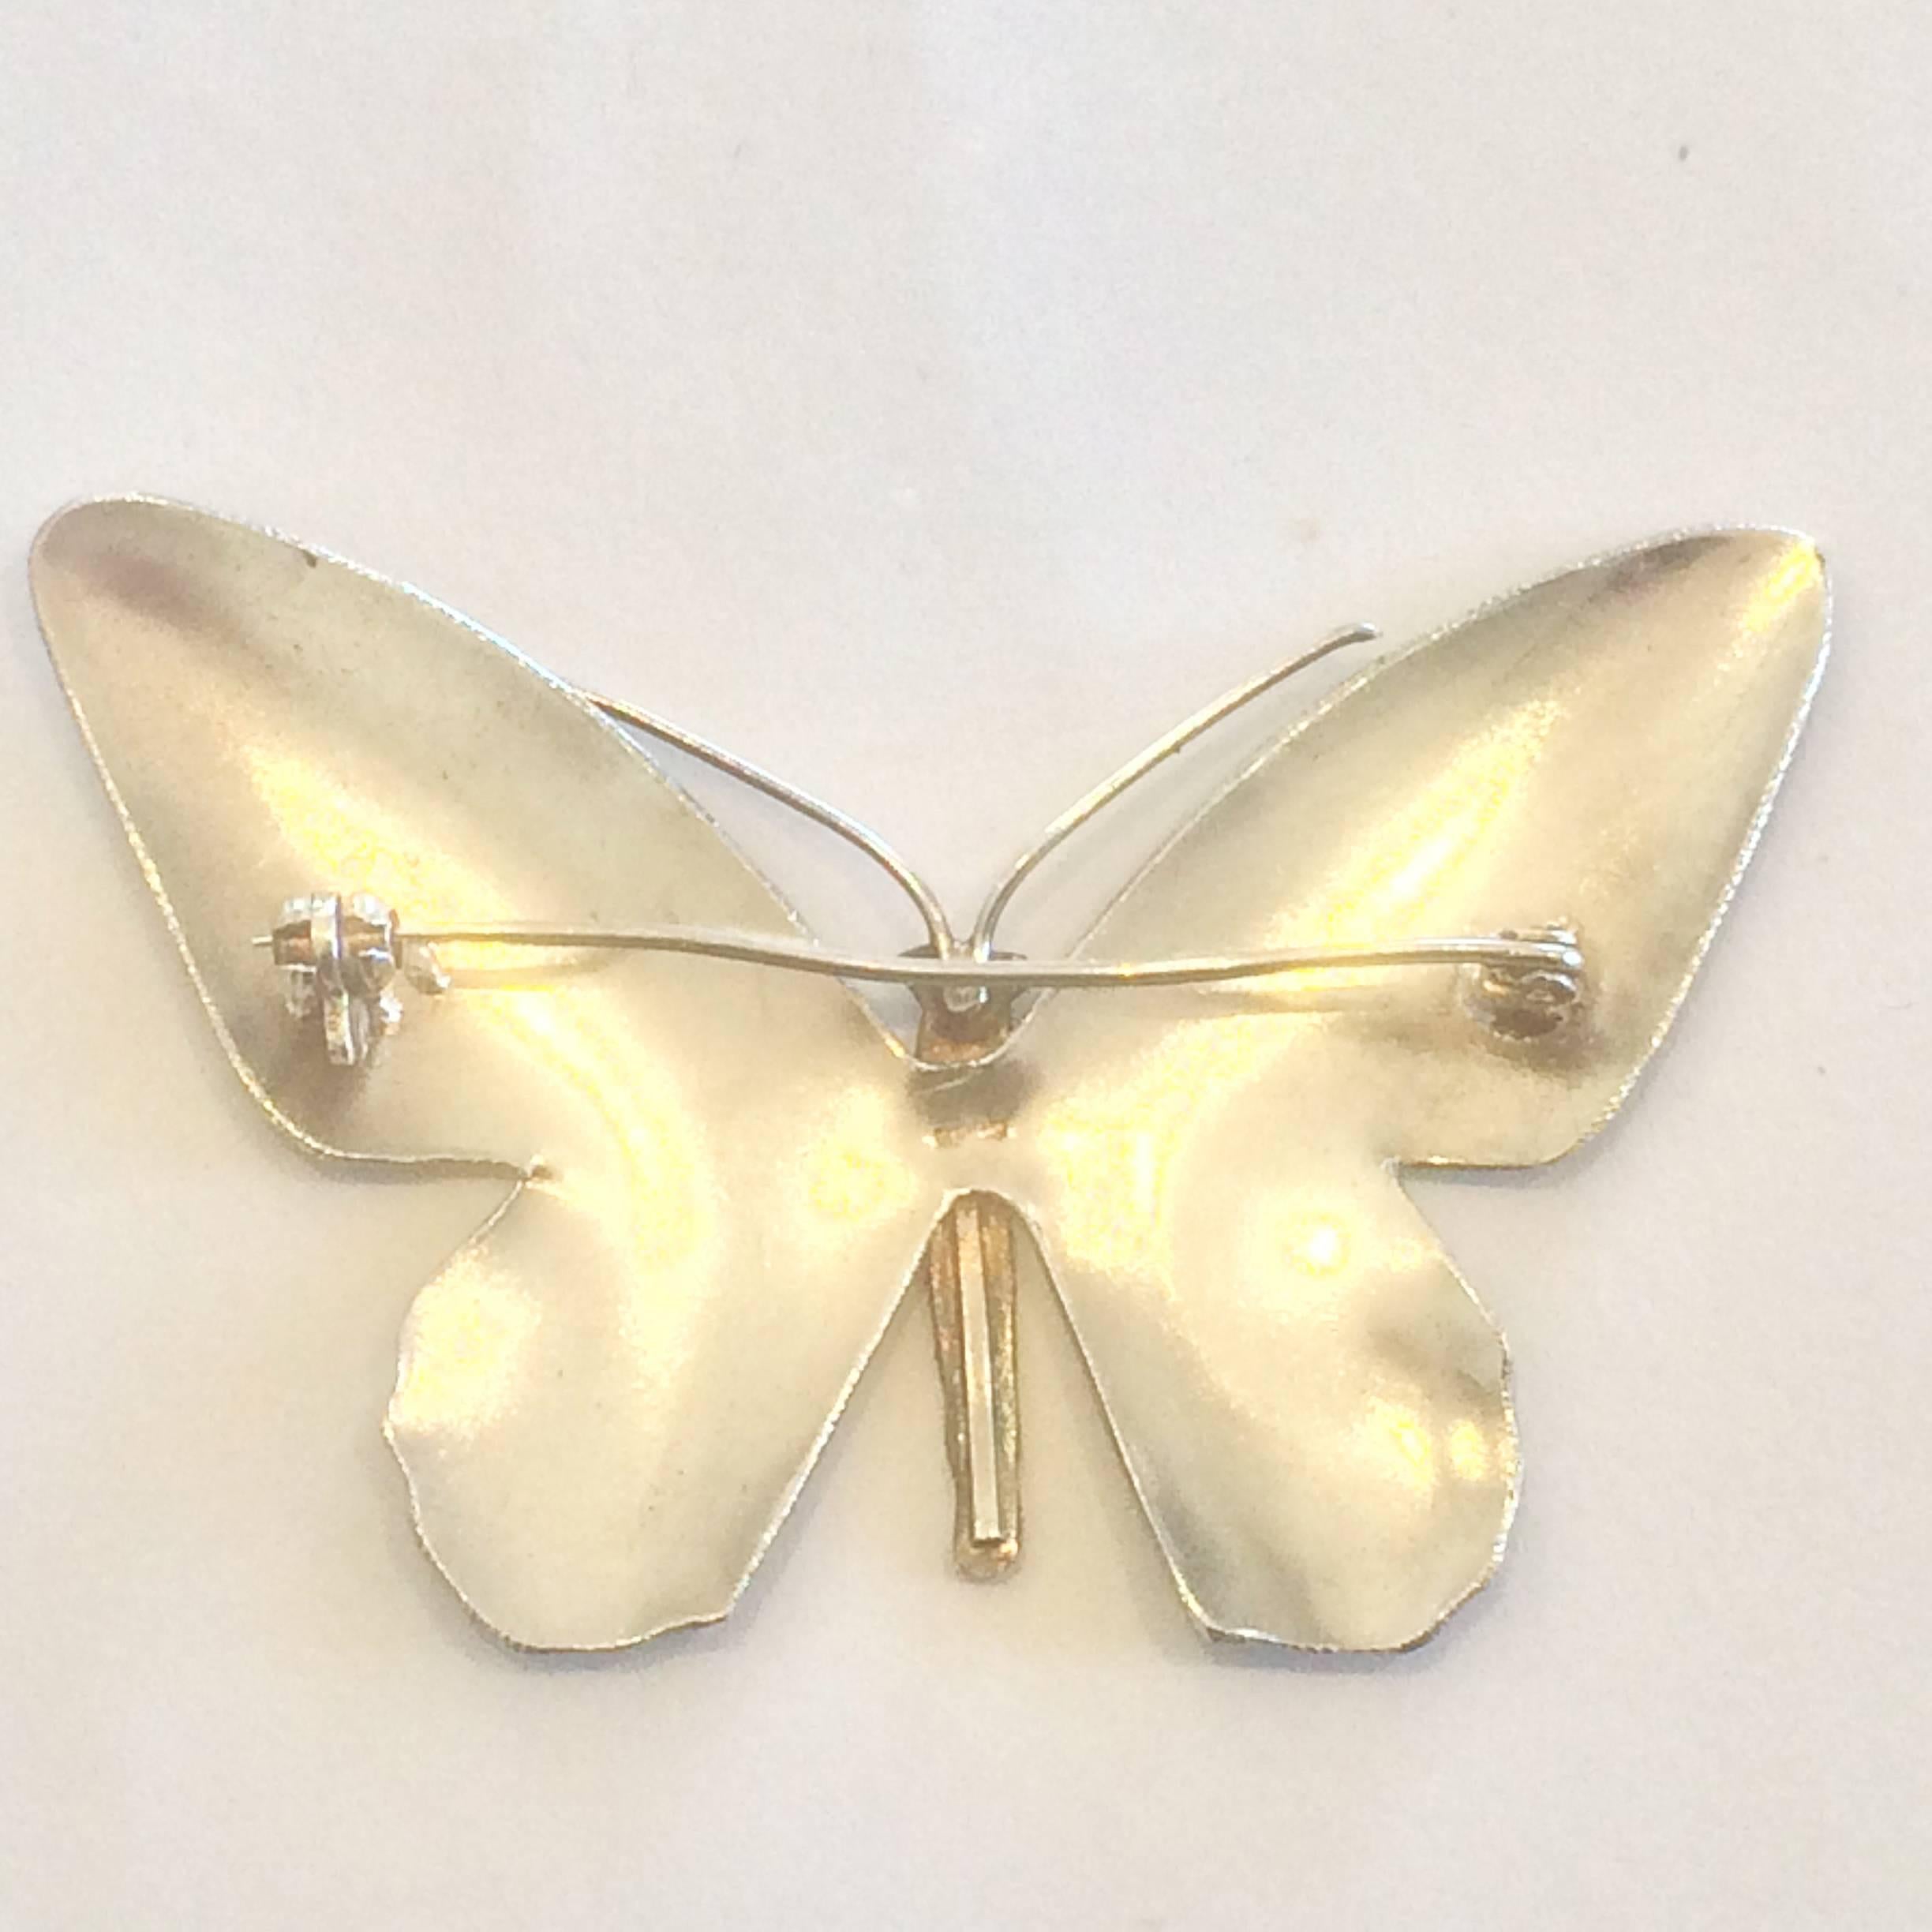 Art Deco Brooch in Sterling Silver with finely detailed Multi-coloured enamel, and original “roll-over” safety catch to rear. The Butterfly is actually shaped, and not just “flat” silver. The enamel is totally perfect with no losses or repairs. The